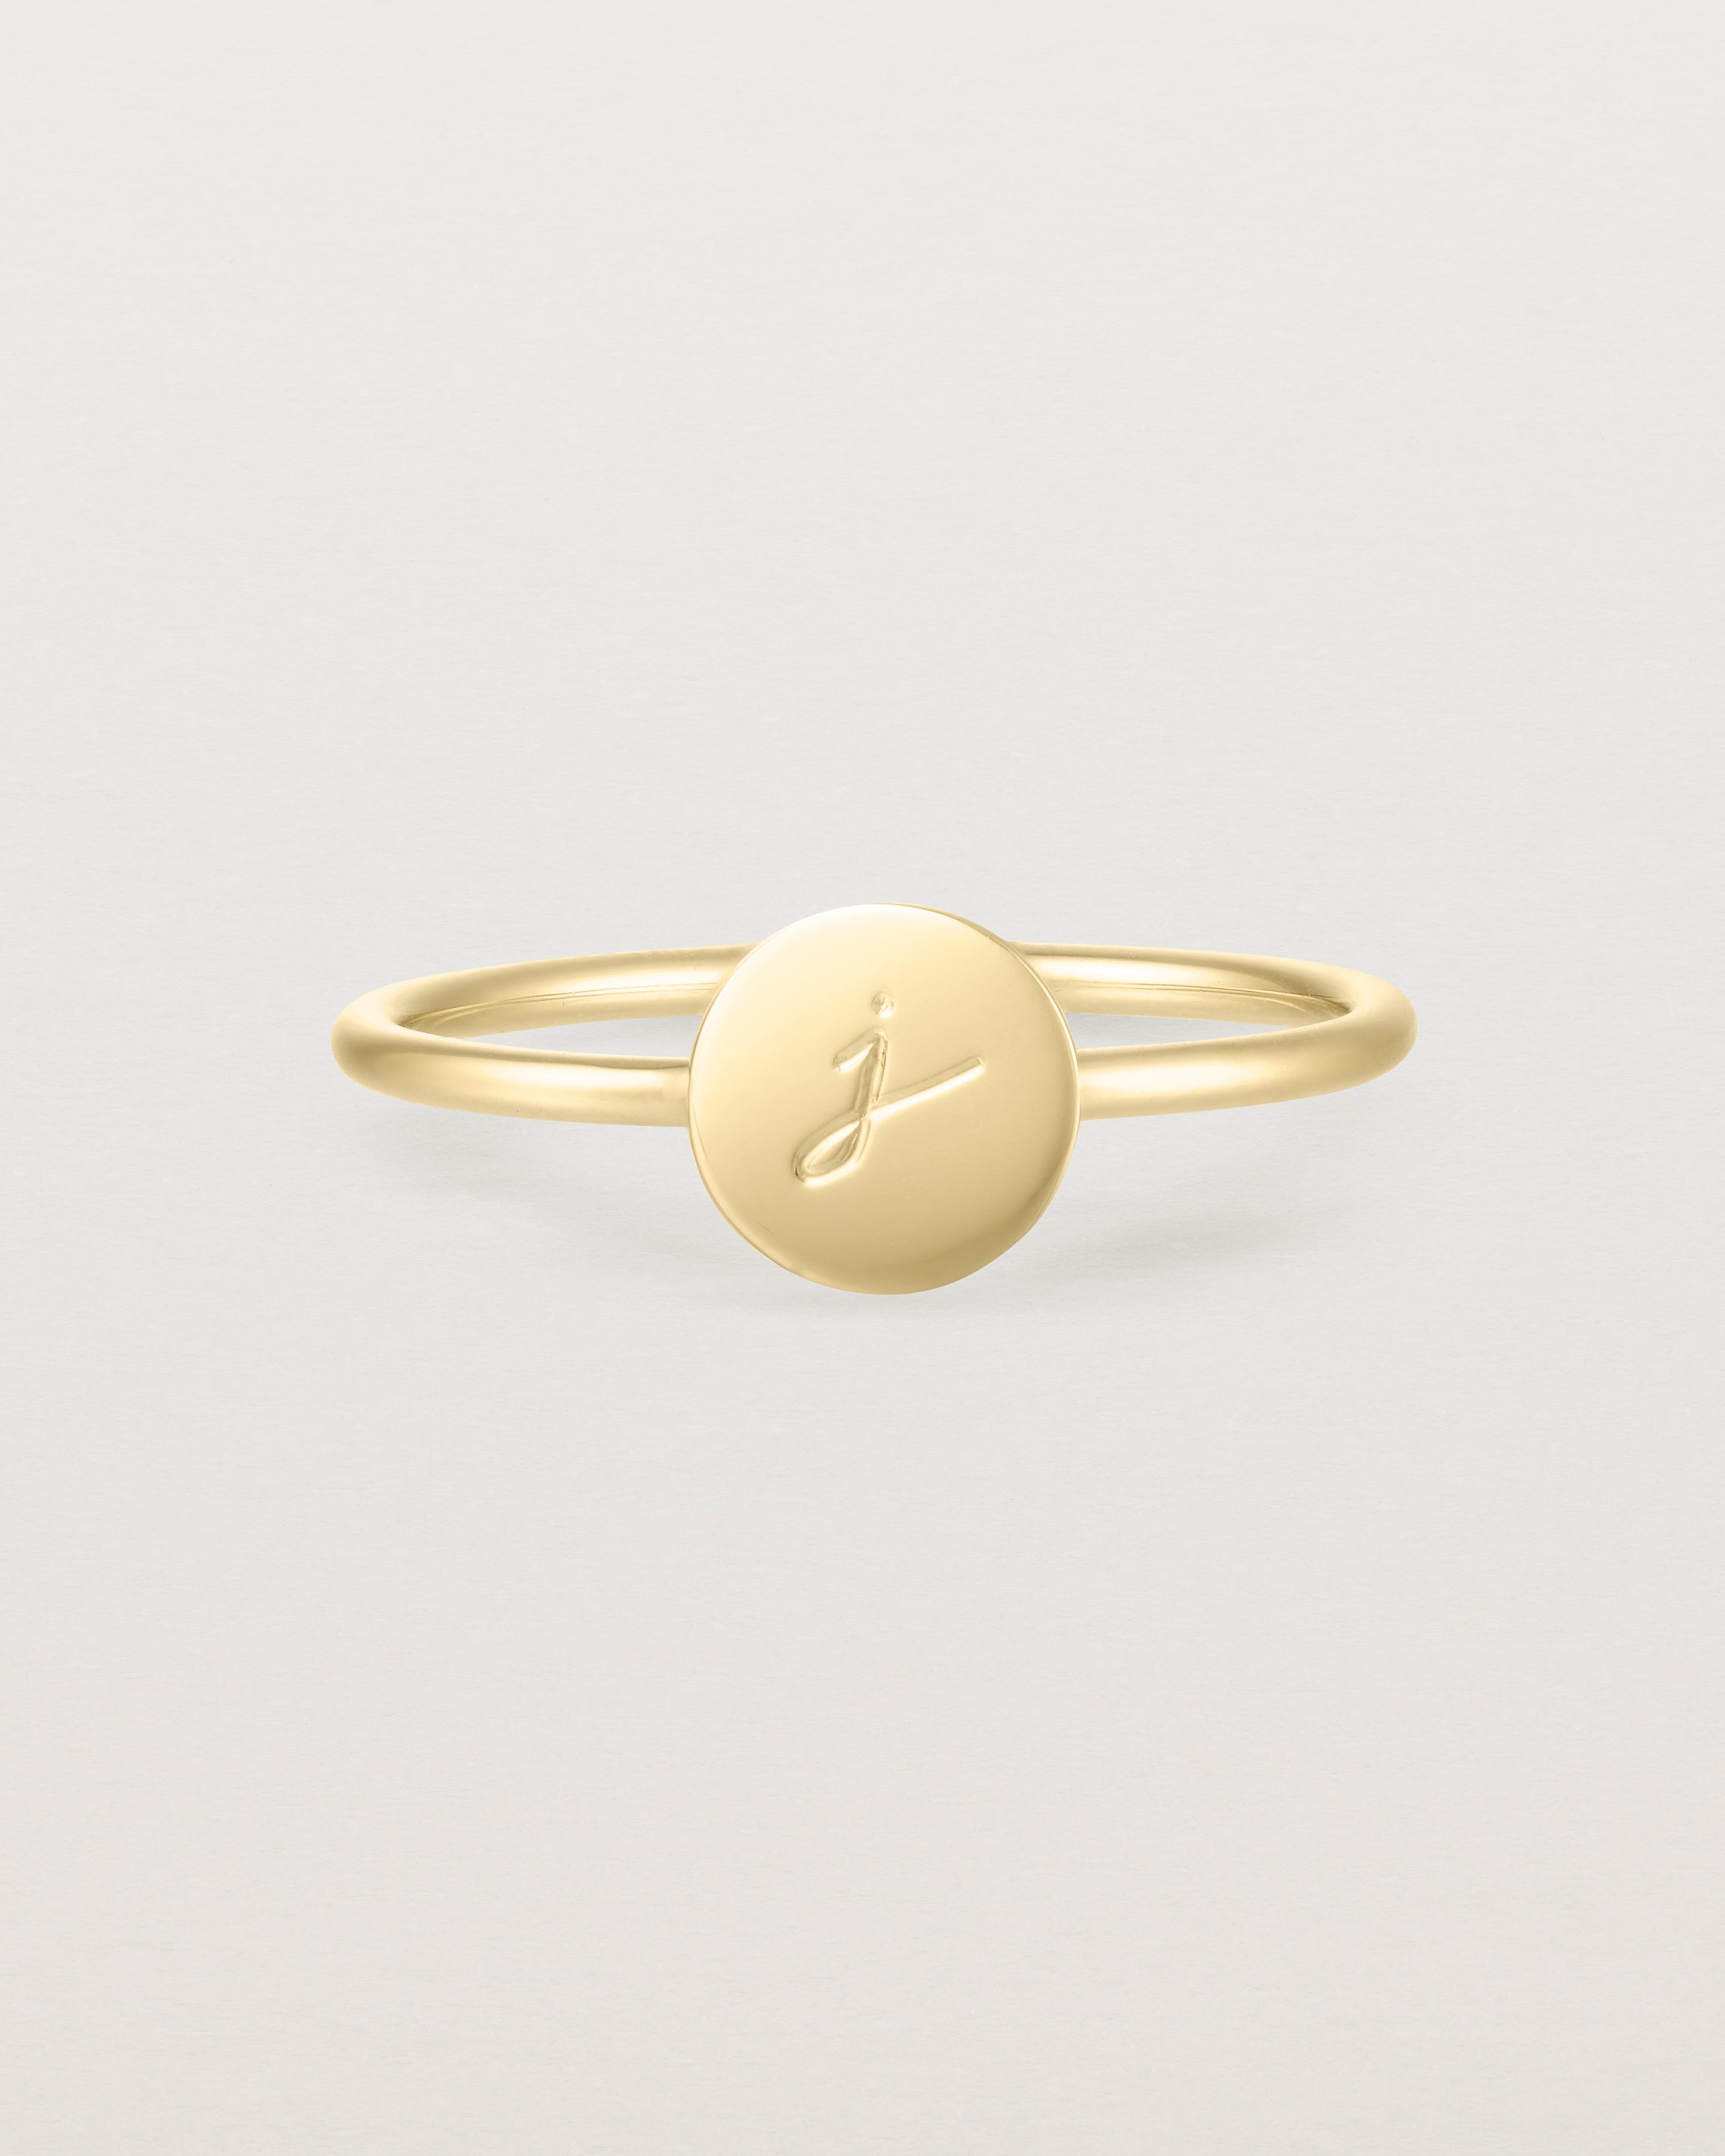 Front view of a yellow gold ring featuring a disc with the letter j engraved